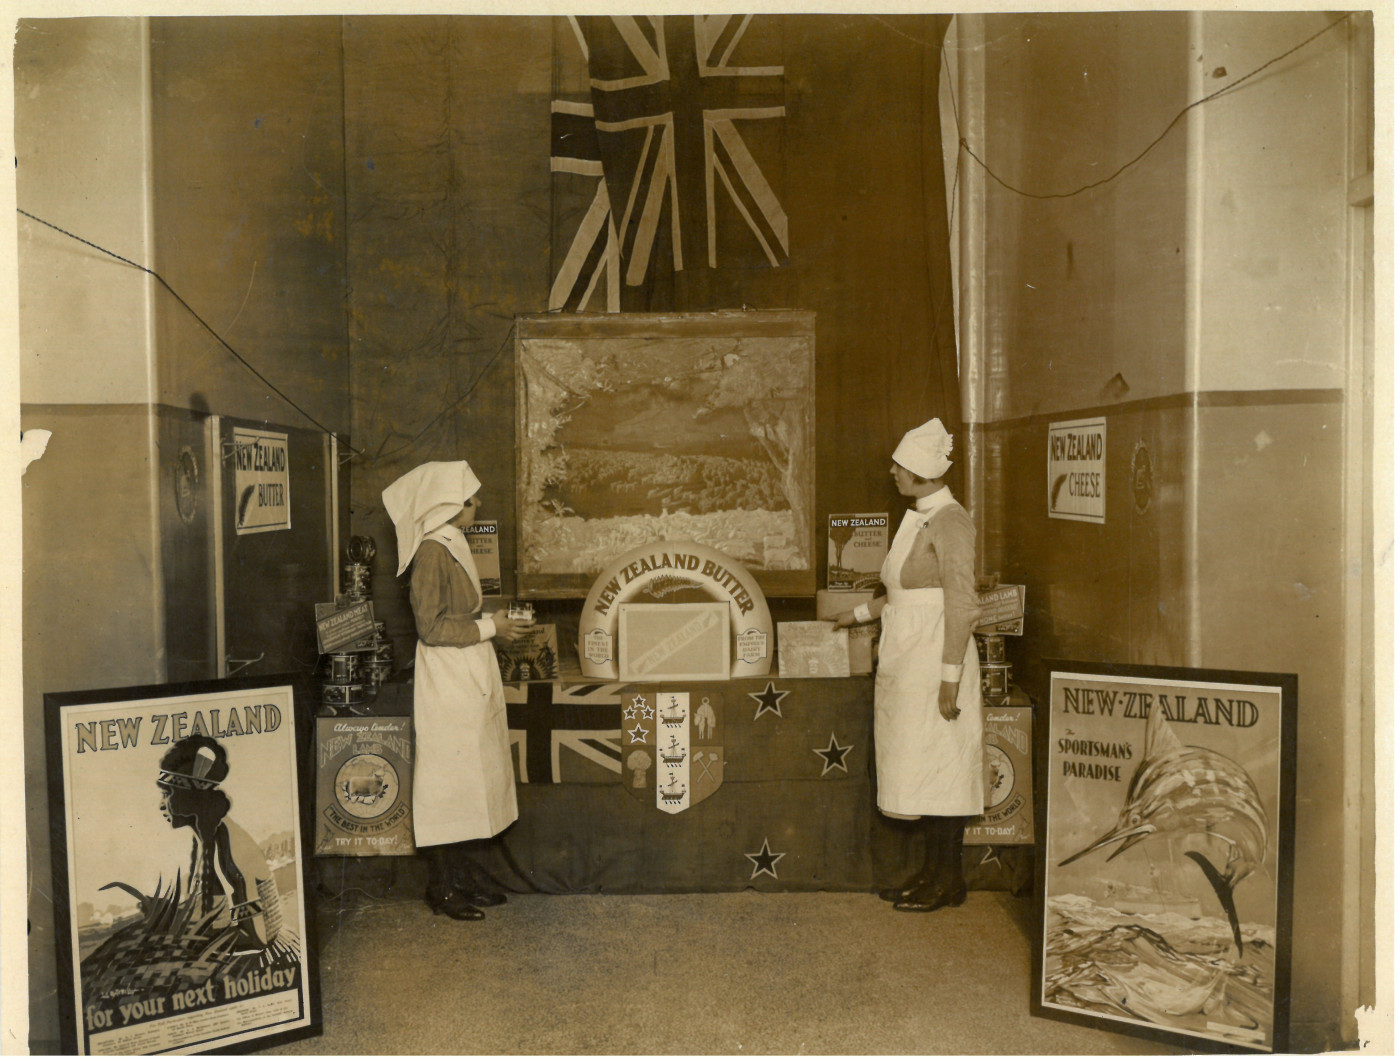 Picture 13 - Dreadnought nurses at the Christmas exhibition stand 1929 